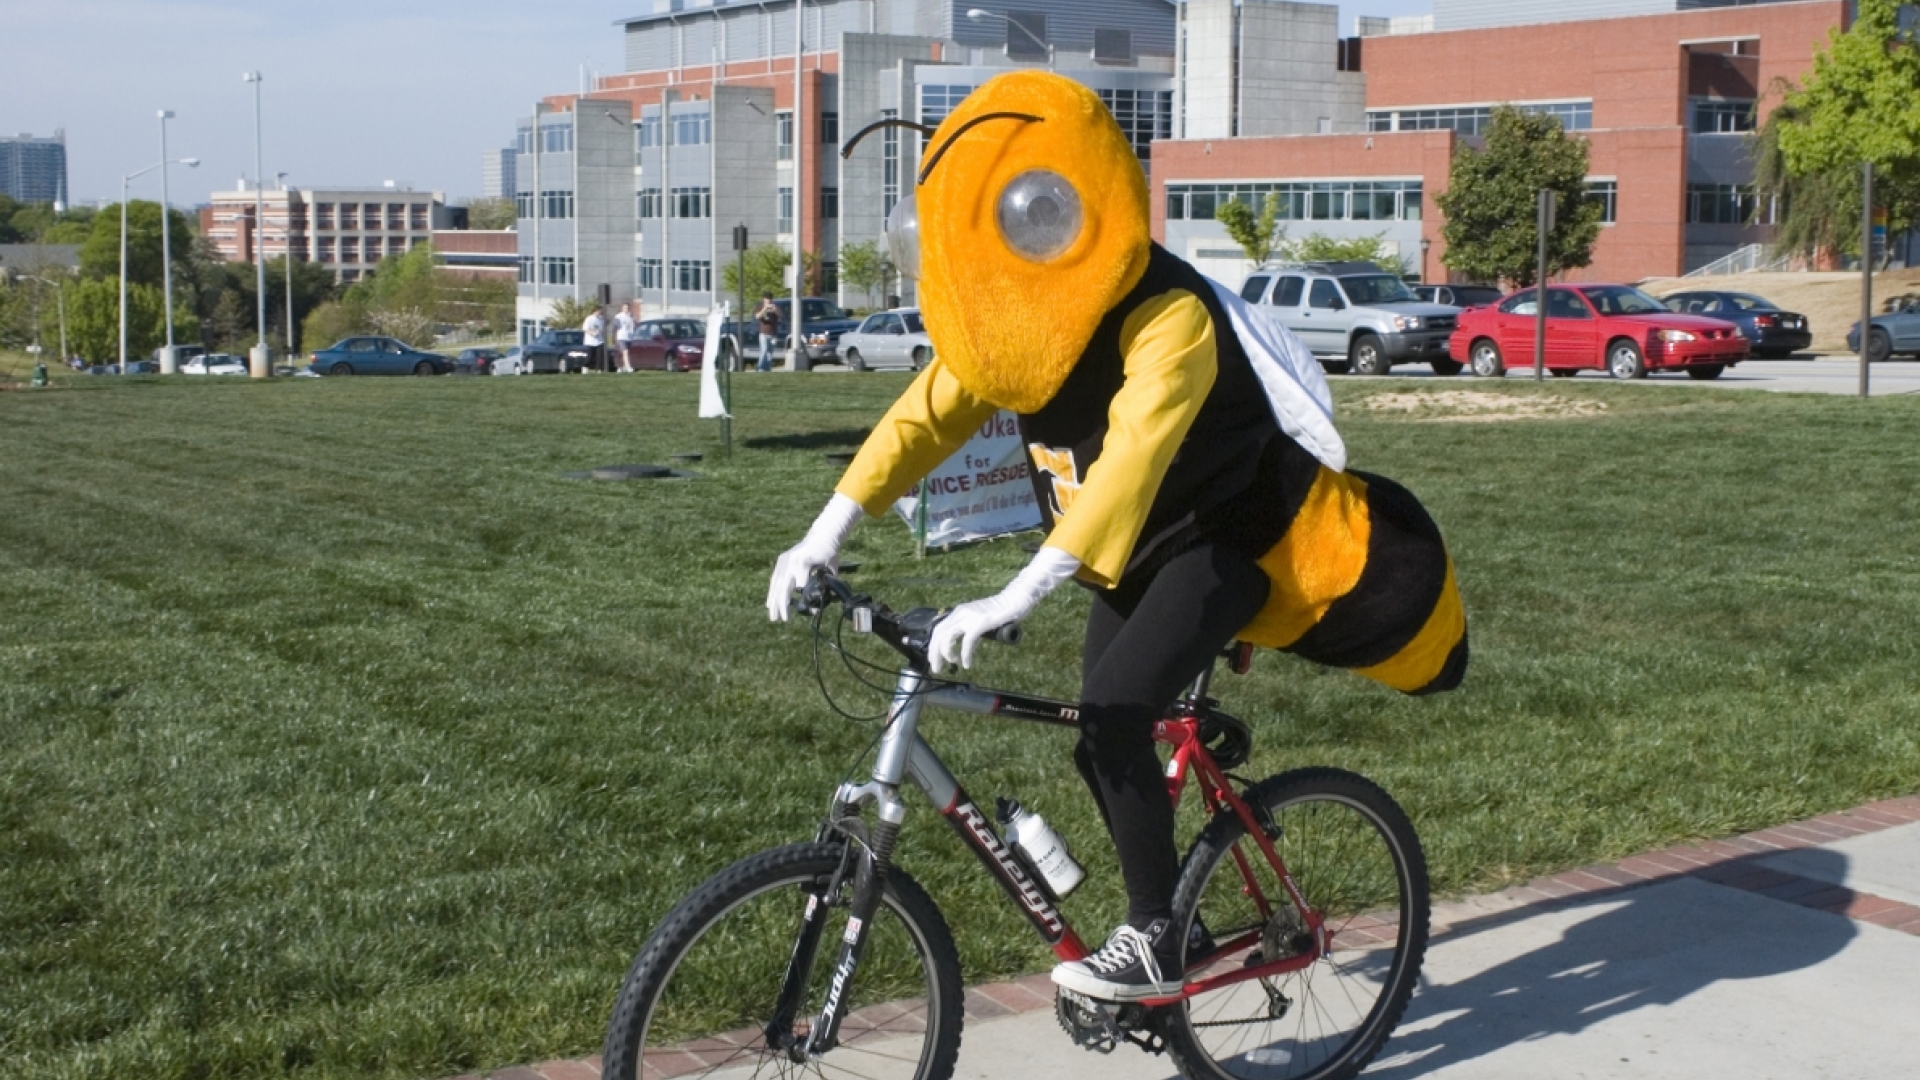 buzz the mascot riding bicycle